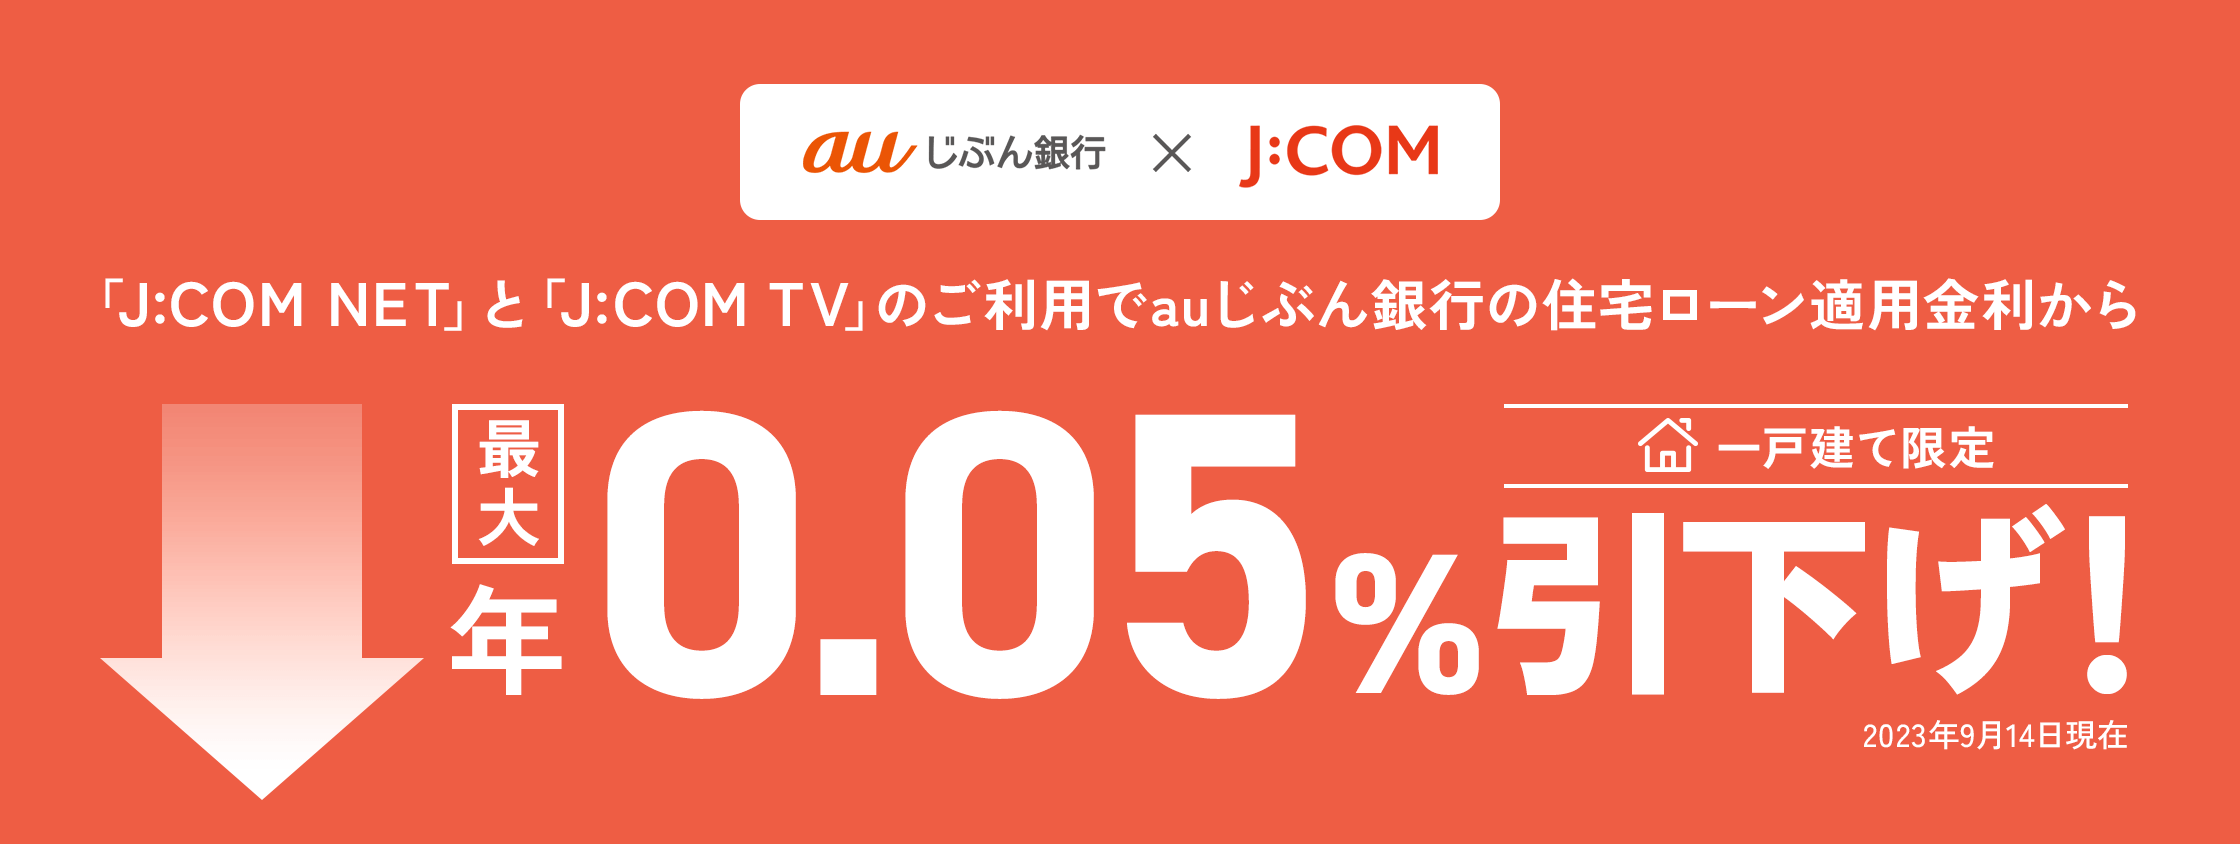 By using J:COM NET and J:COM TV, you can get up to 0.05% reduction per year from the applicable home loan interest rate!